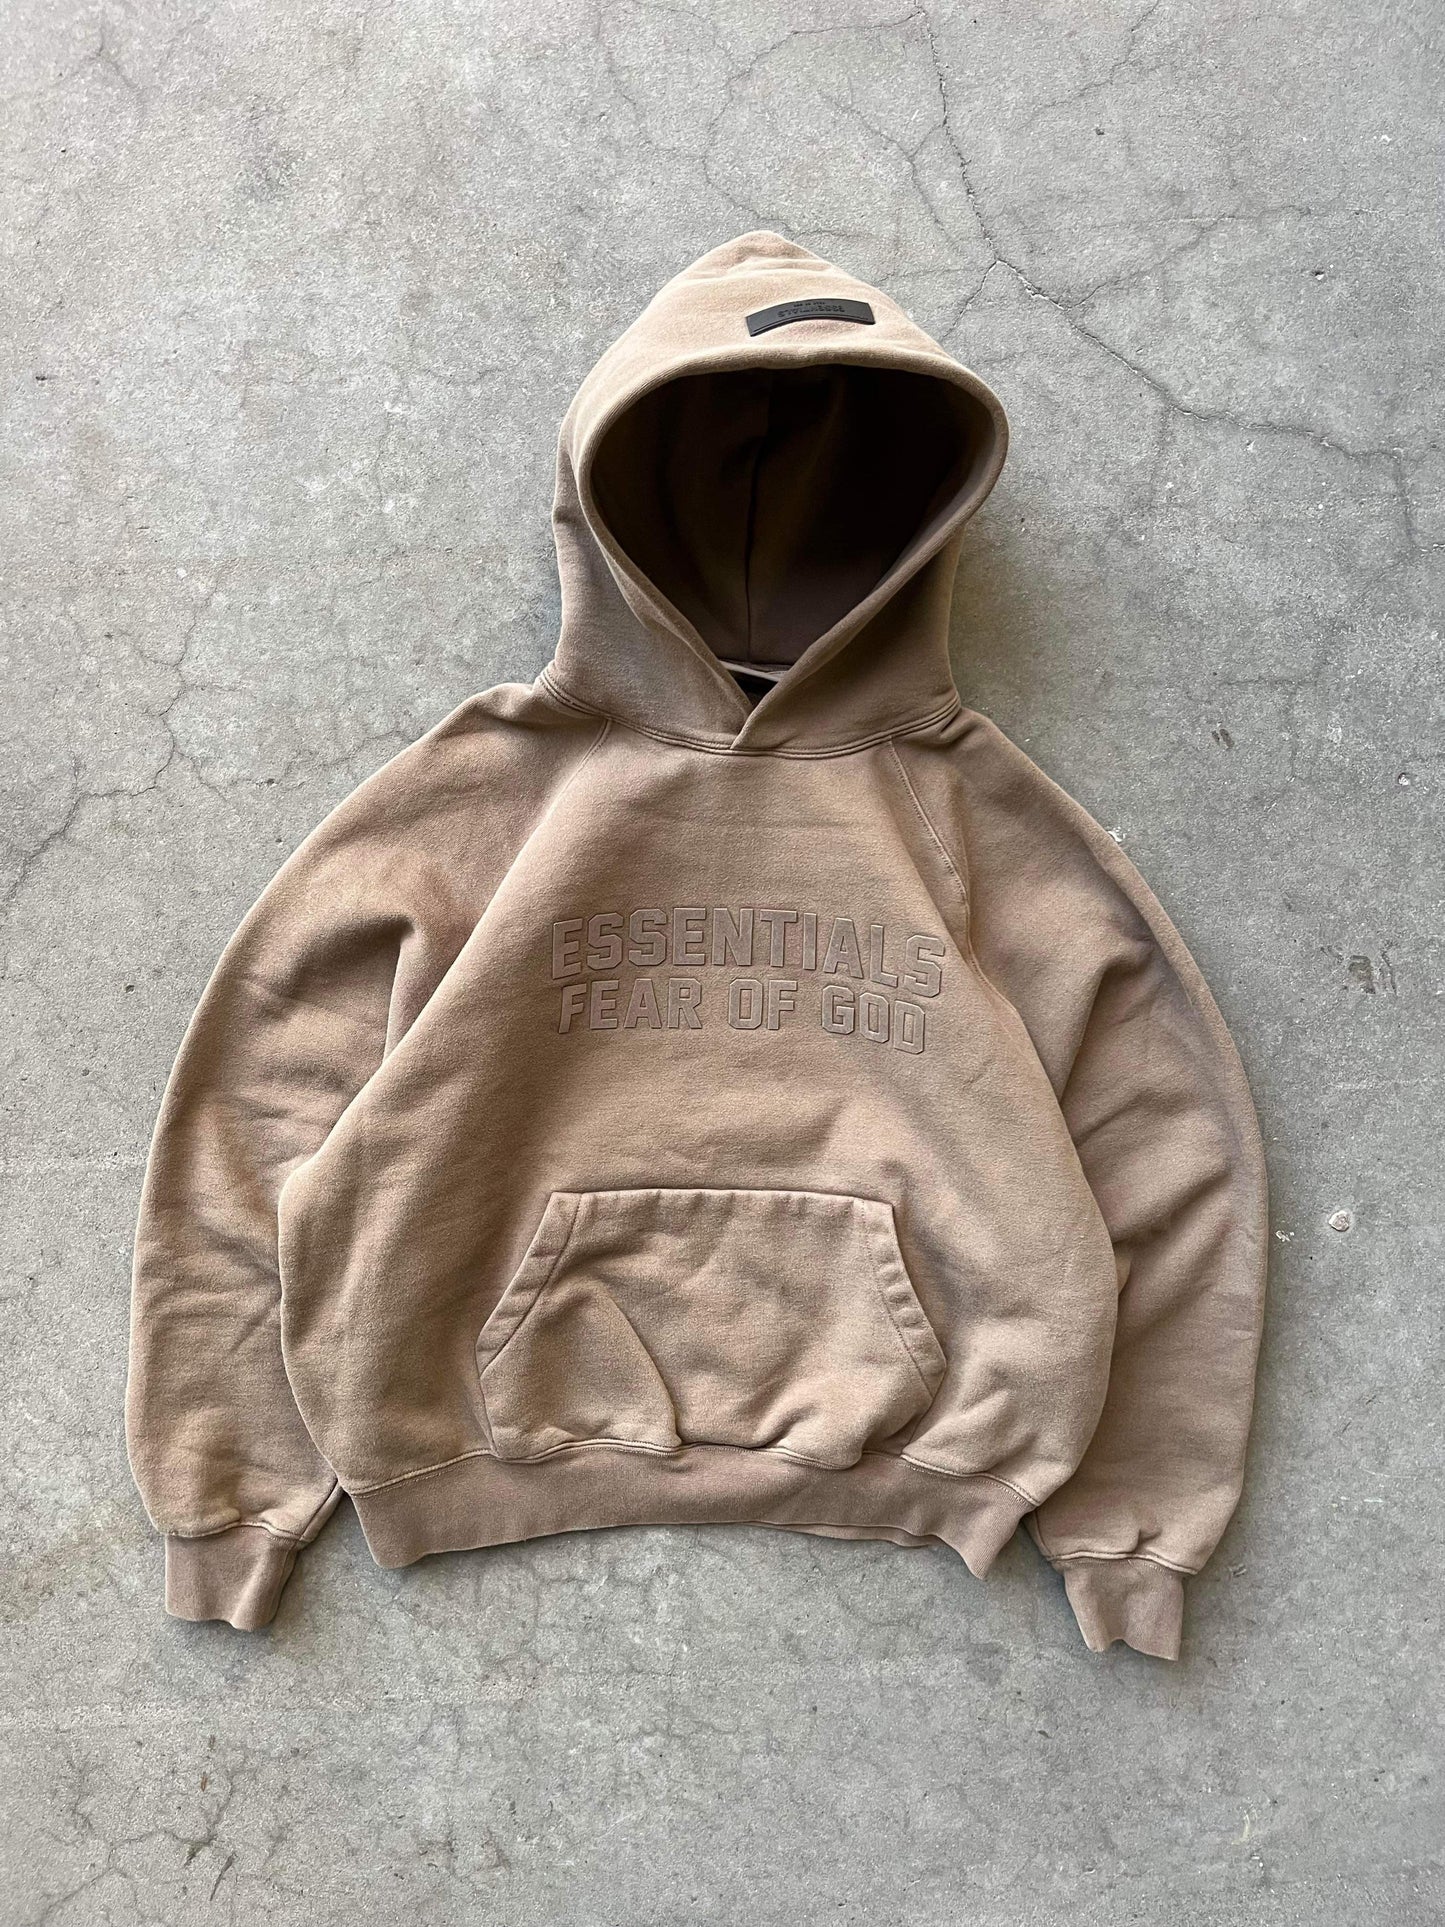 (XS/S) Essentials Fear of God Hoodie